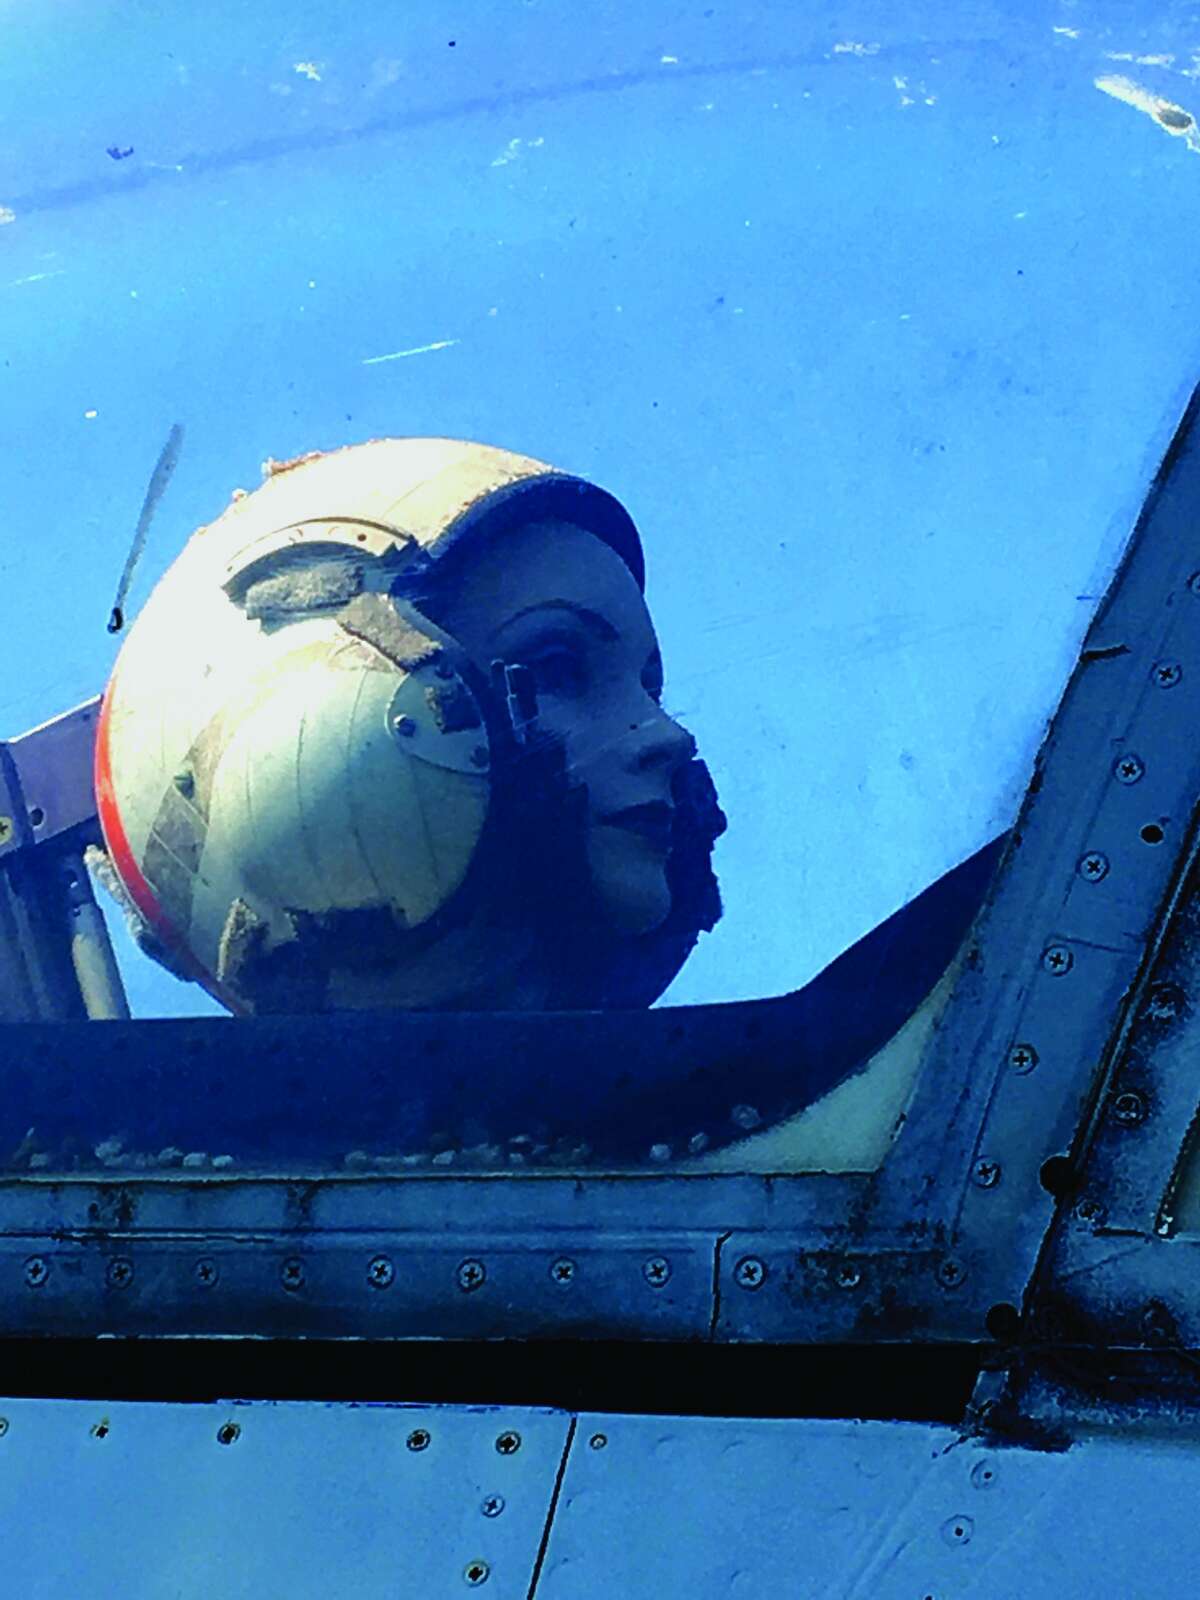 Mabel, the display pilot in the U.S. Navy A7 Corsair on display at Edwardsville Township Community Park, has kept watch over Township Park for more than 25 years. She is still missing.